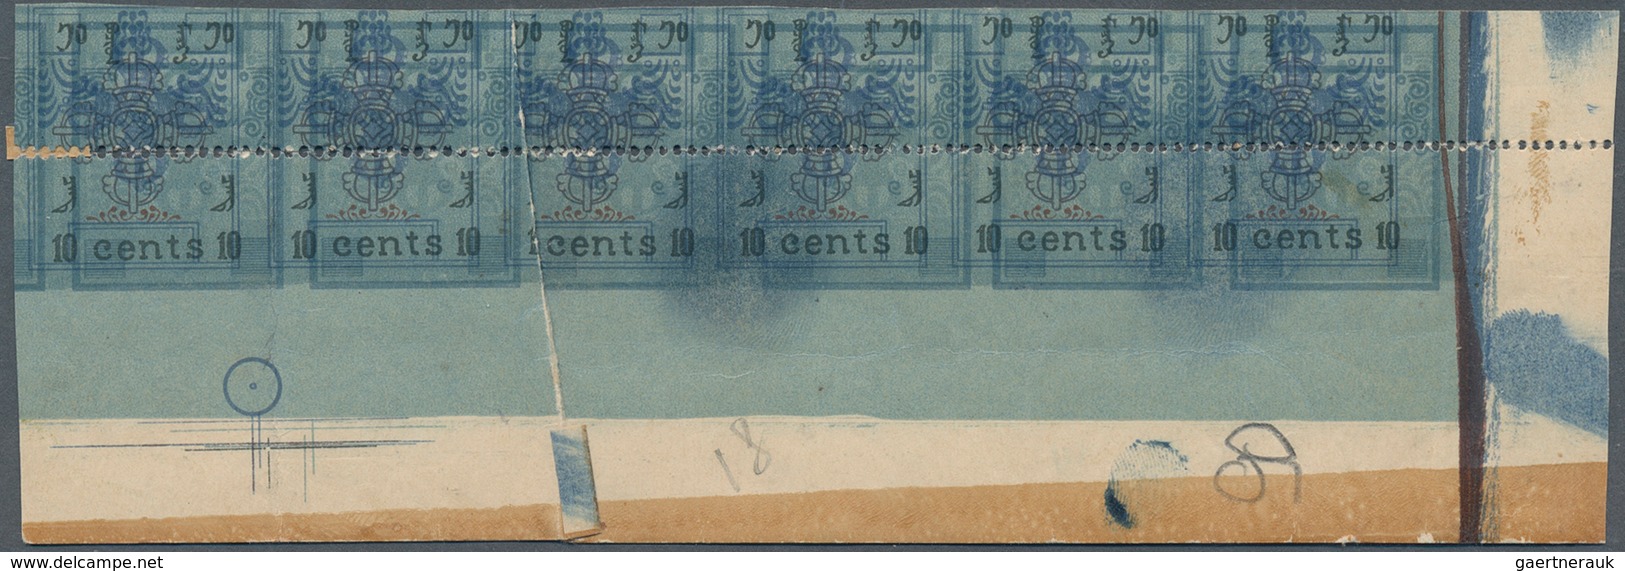 09559 Mongolei: 1924 First Issue 10c. IMPERFORATED PROOF, Bottom Right Corner Strip Of 6, Variety "SHIFTED - Mongolia